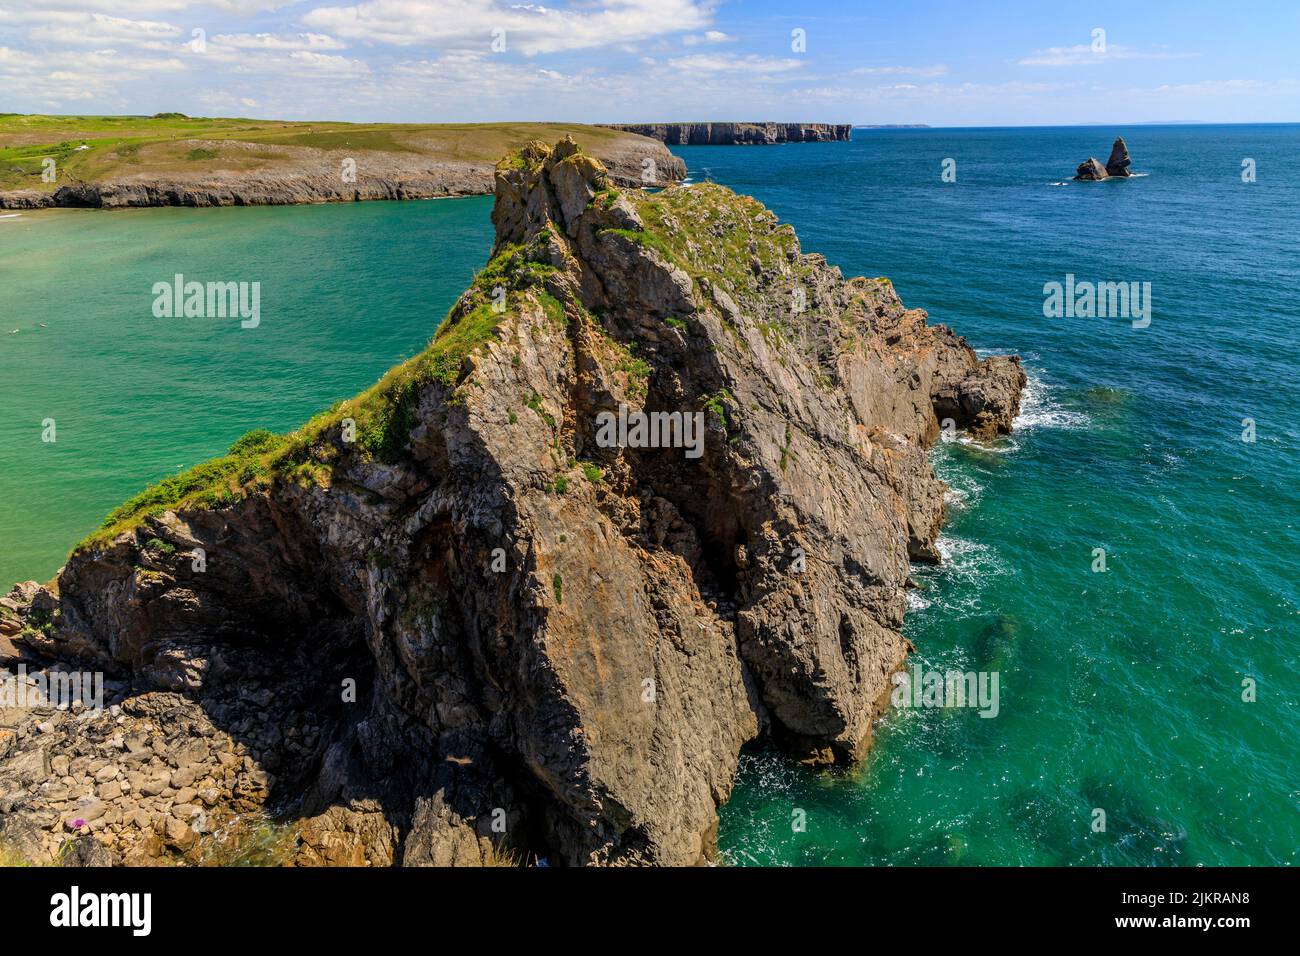 Star Rock (L) and Church Rock (R) sit at the mouth of Broadhaven beach, Pembrokeshire, Wales, UK Stock Photo